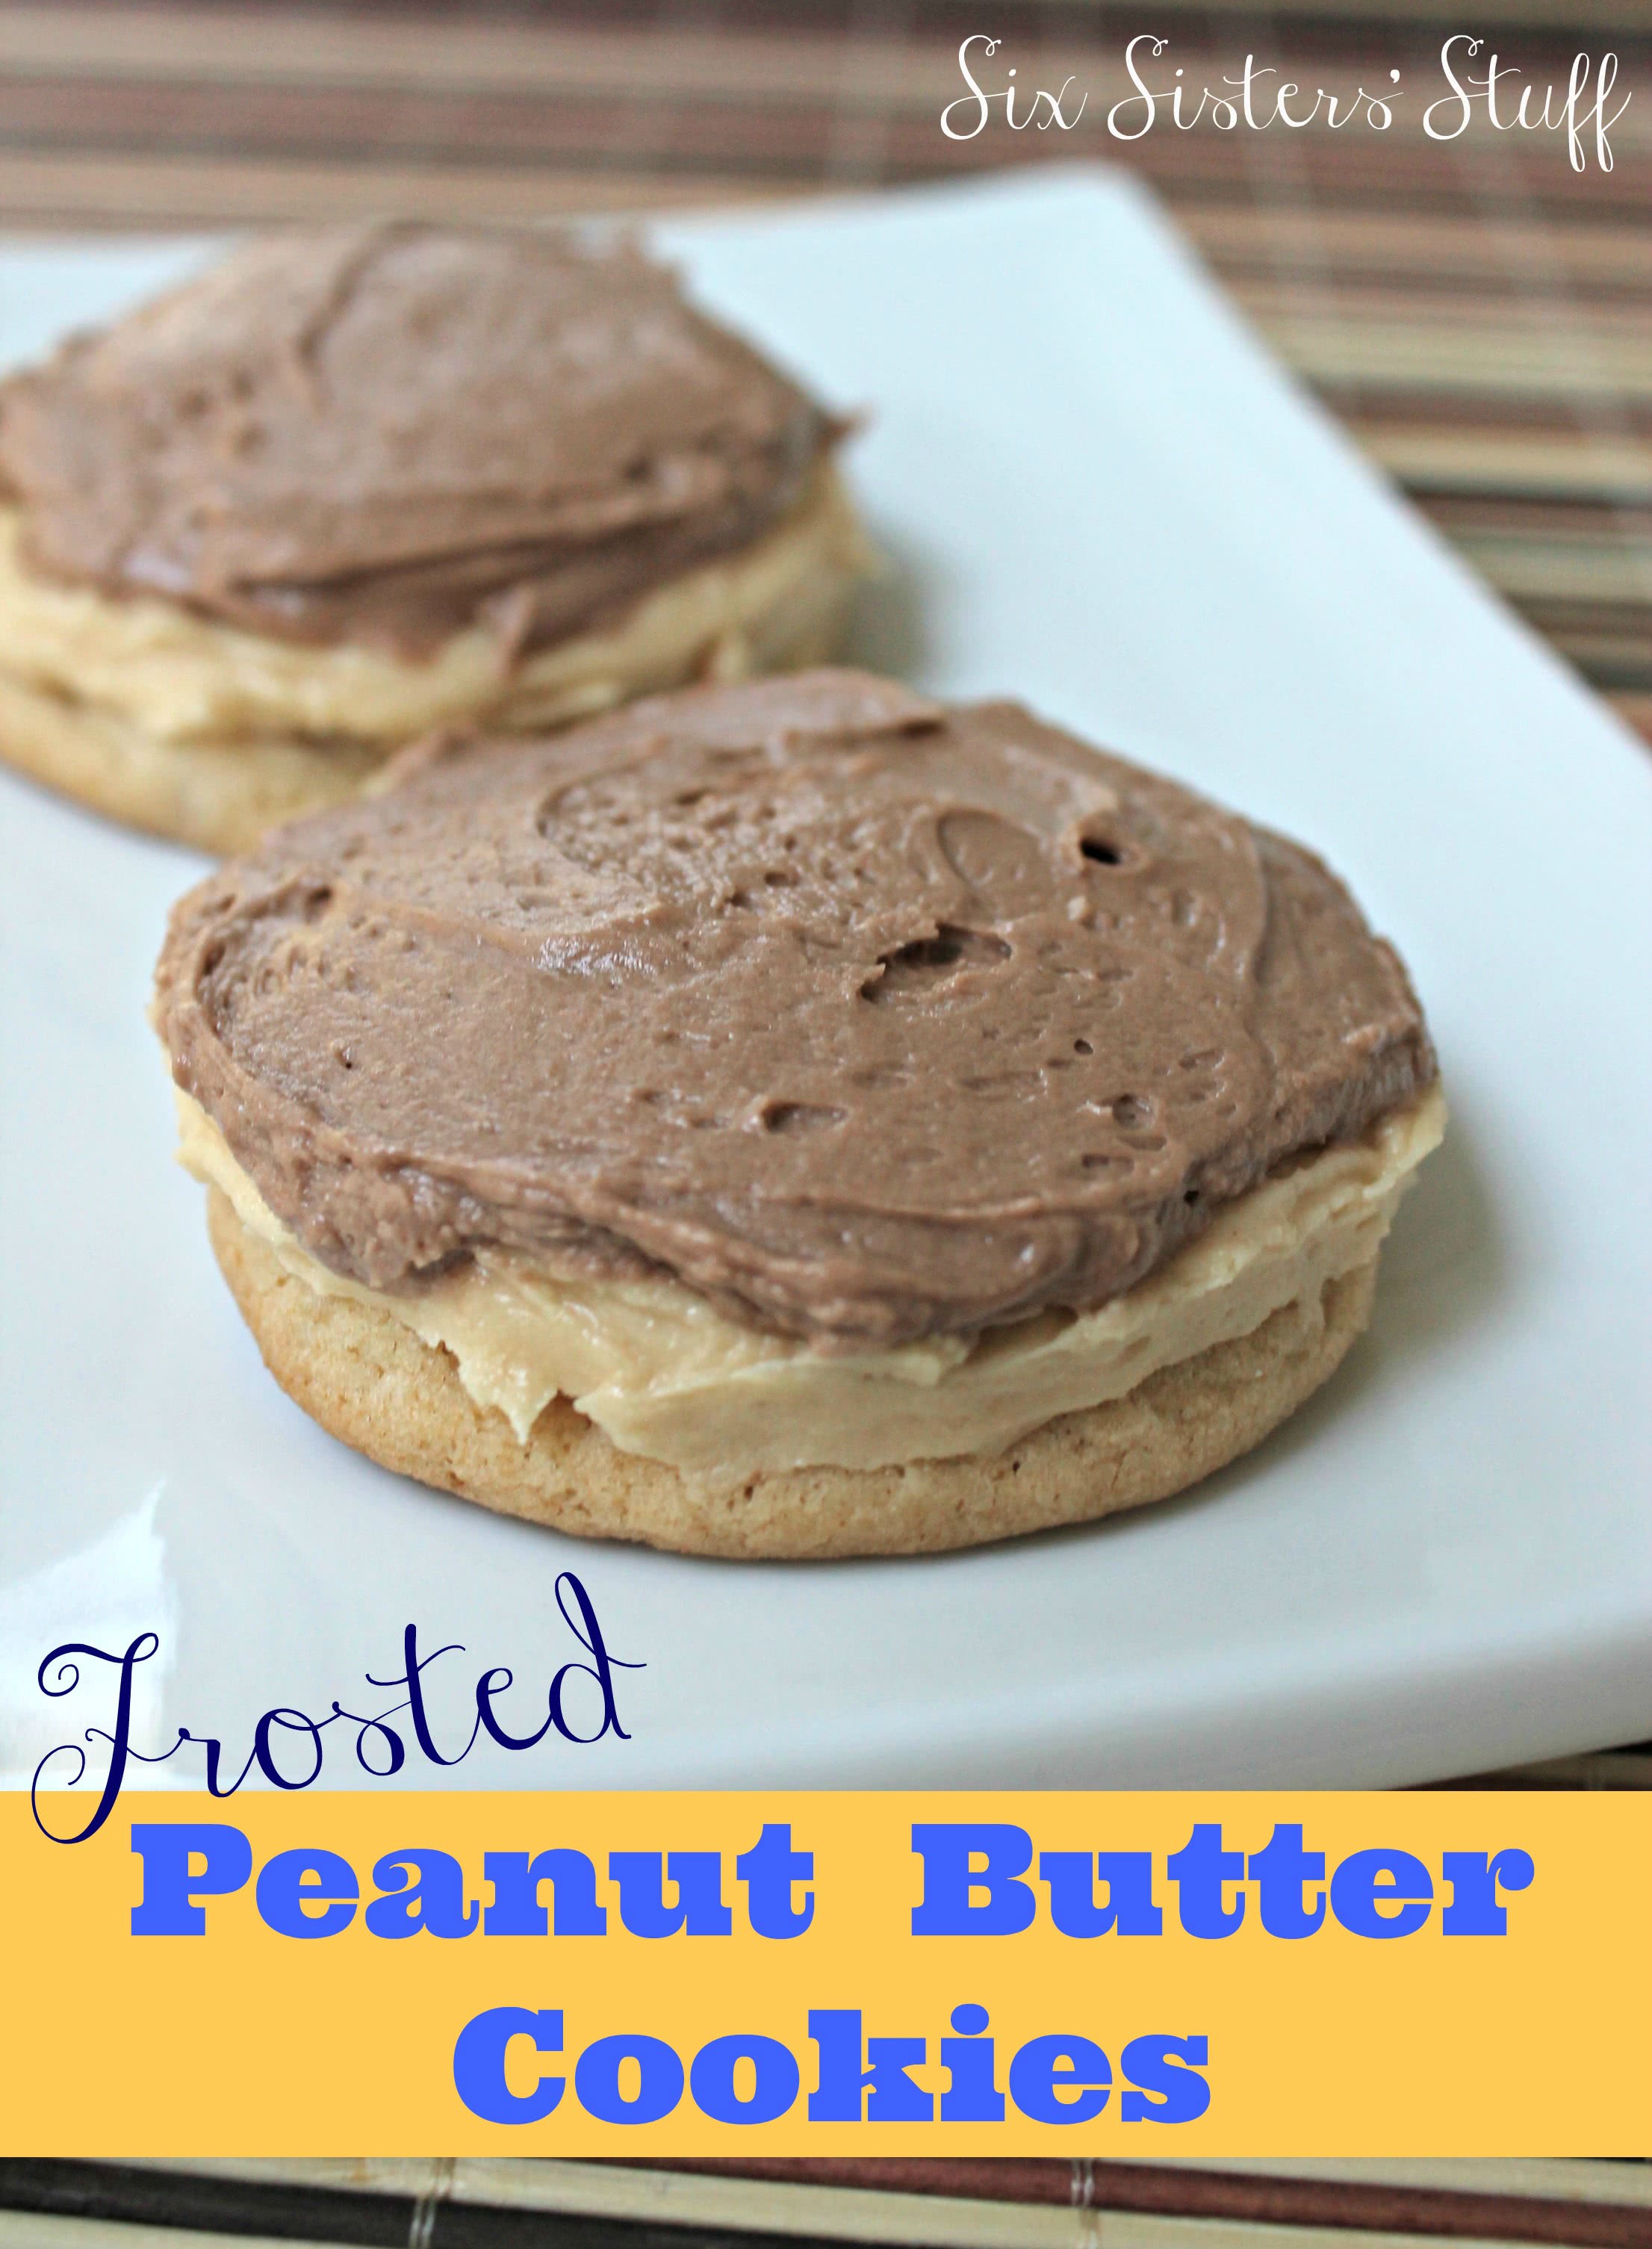 Cutler’s Frosted Peanut Butter Cookies